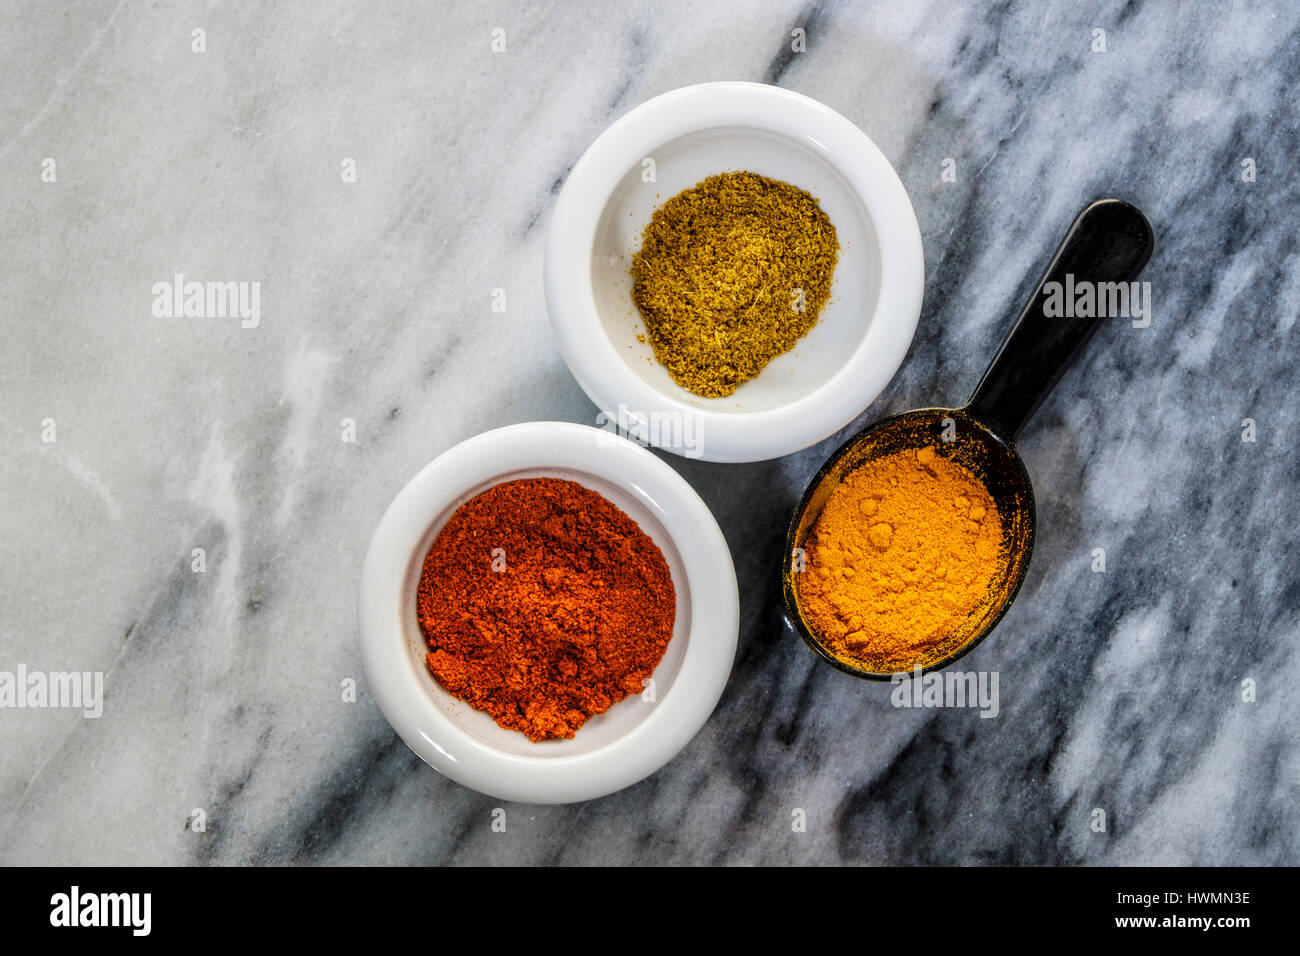 Vibrant colors of spices in small white dishes and black measuring spoon lay flat on marble. Turmeric, cumin and paprika. Stock Photo